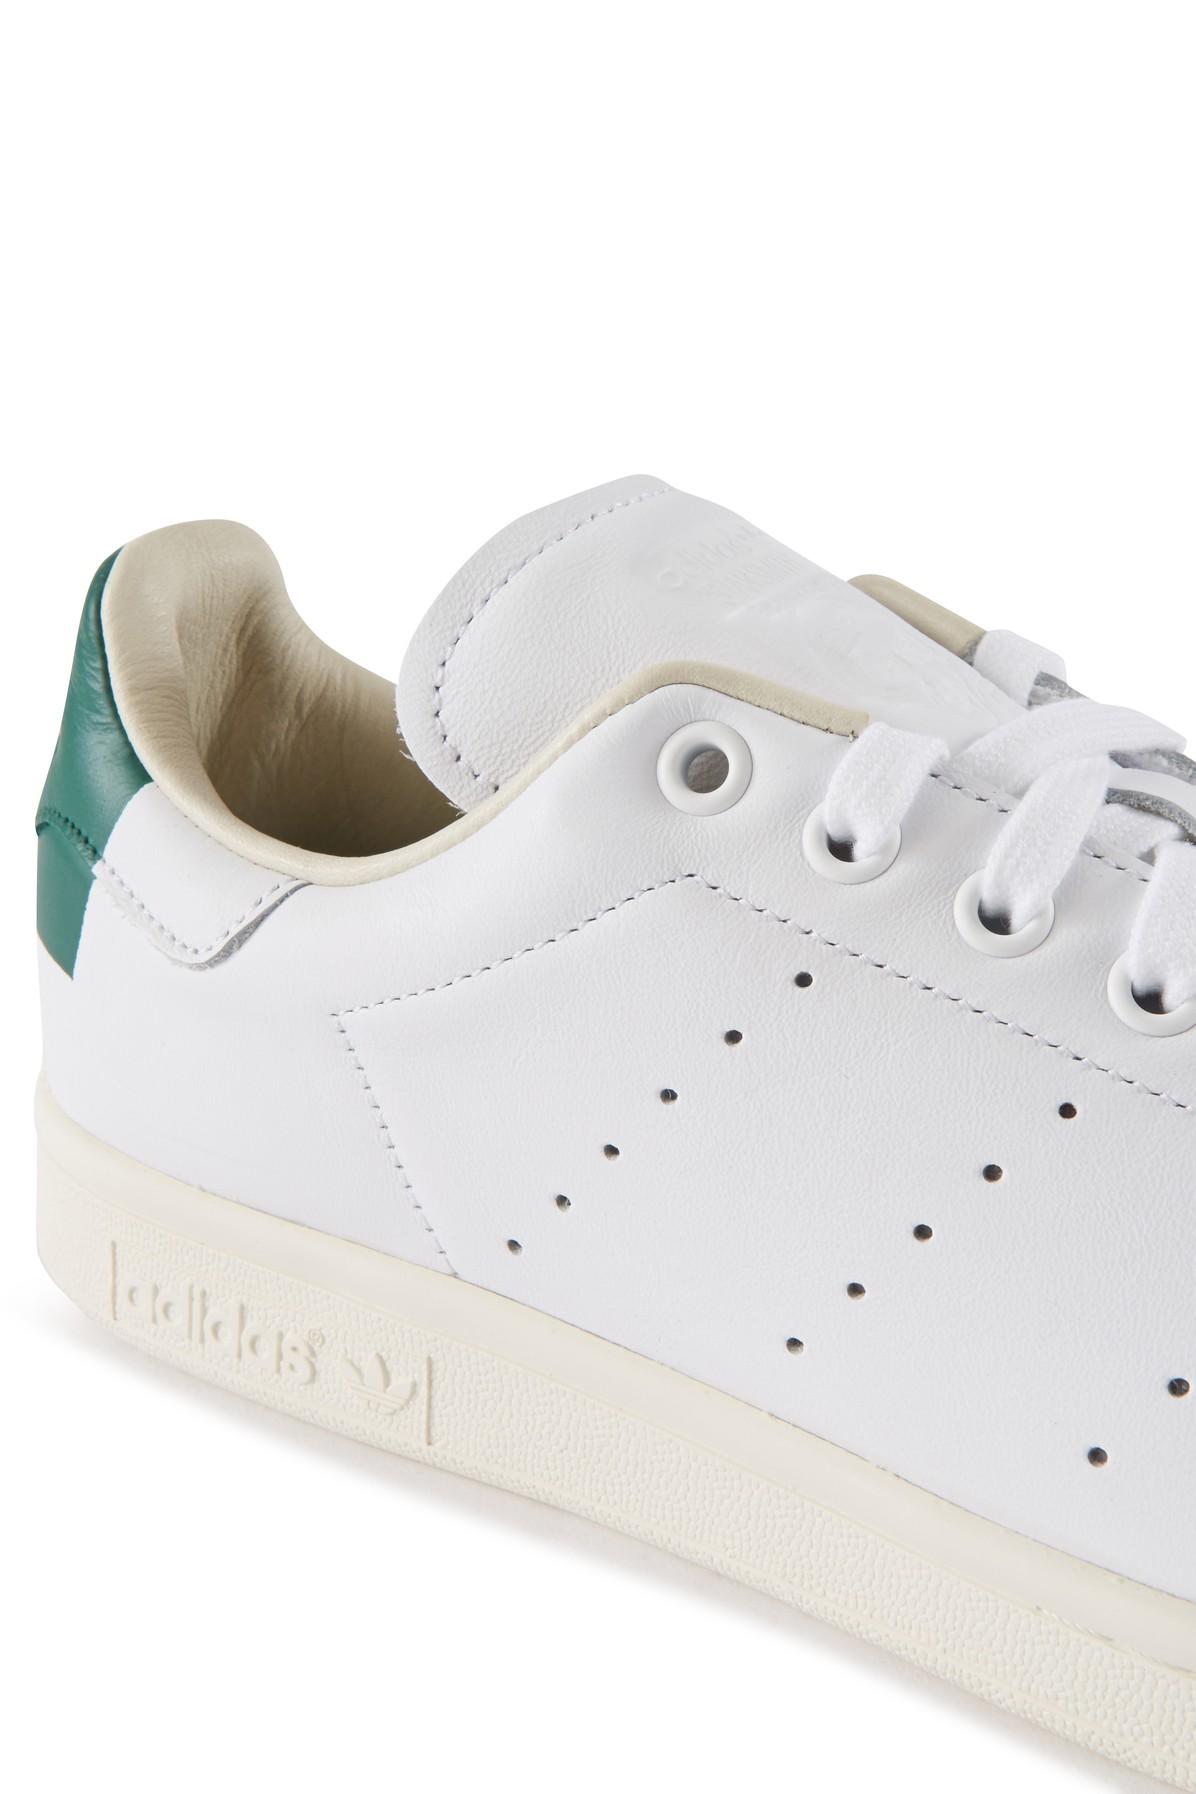 adidas Originals Stan Smith Trainers in White for Men - Lyst